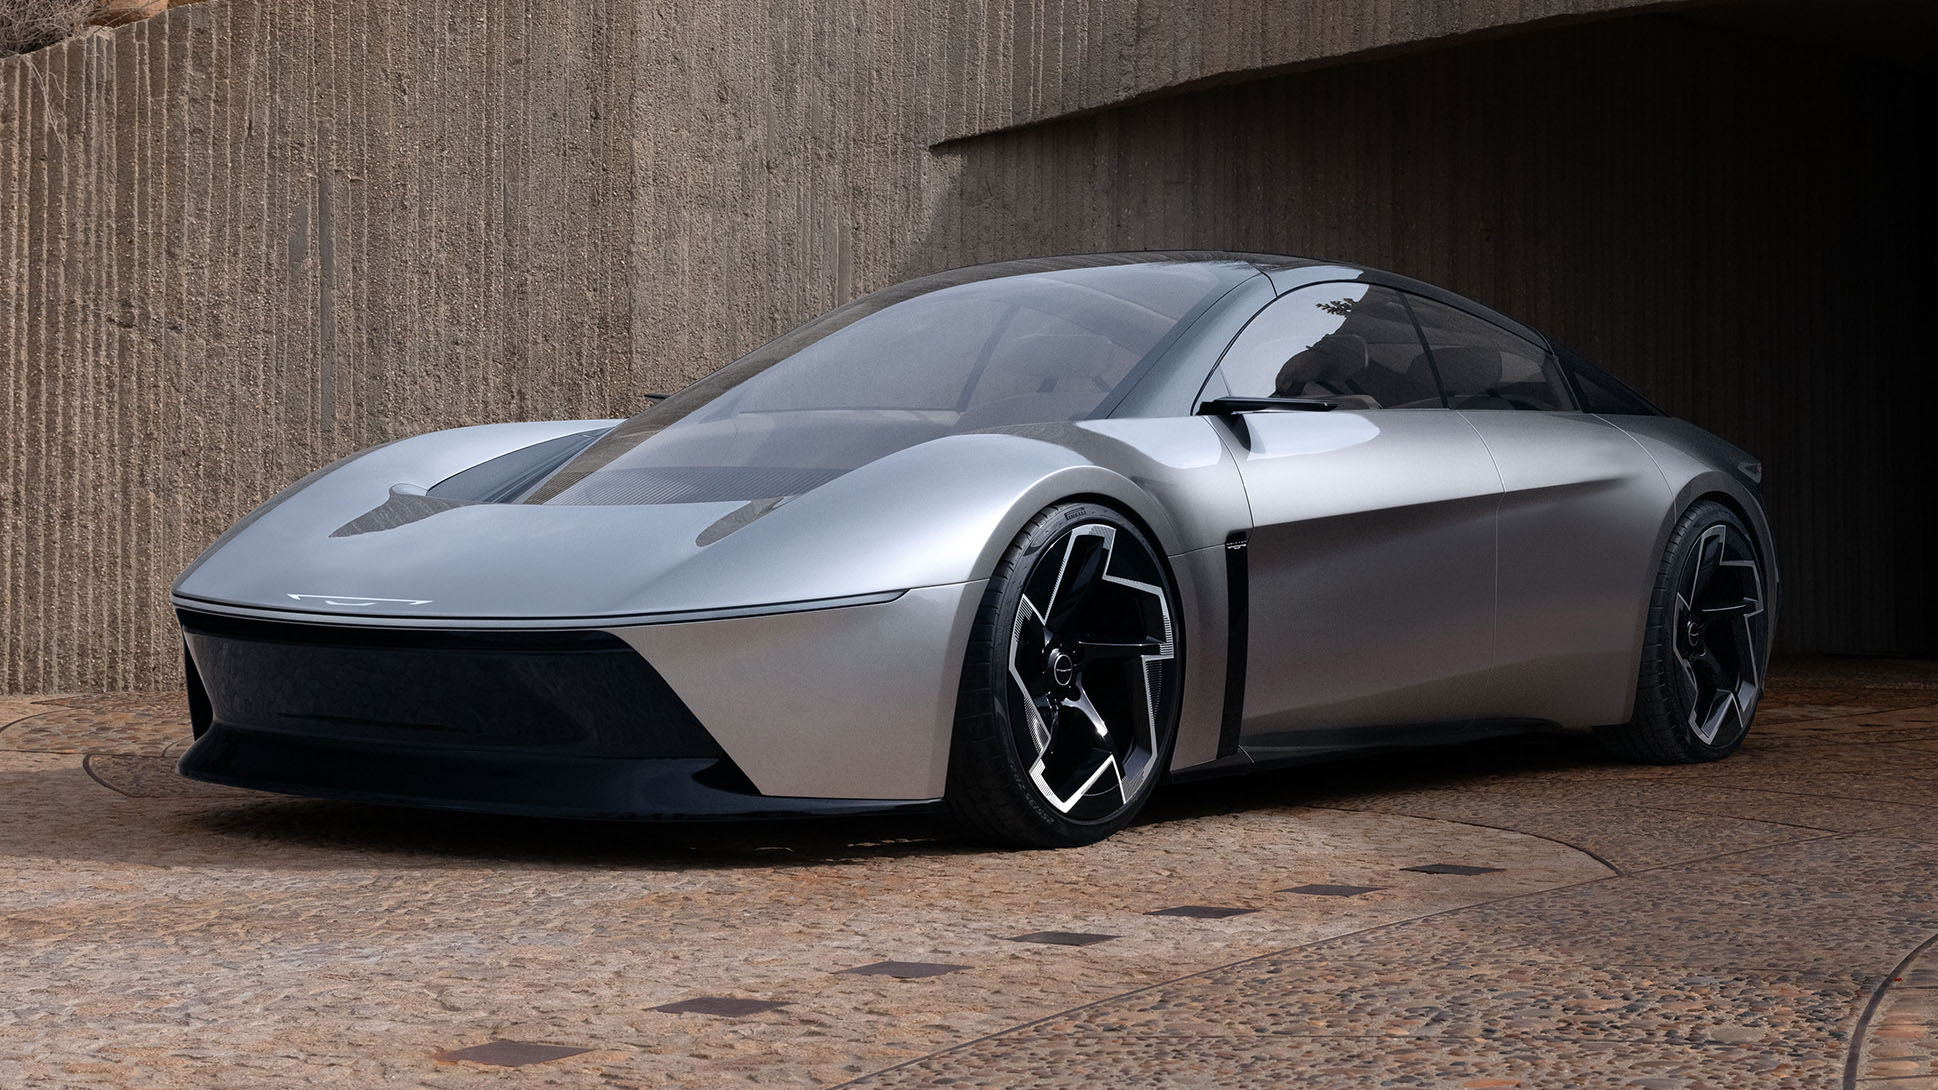 the chrysler halcyon concept is a vision of an optimistic future for chrysler